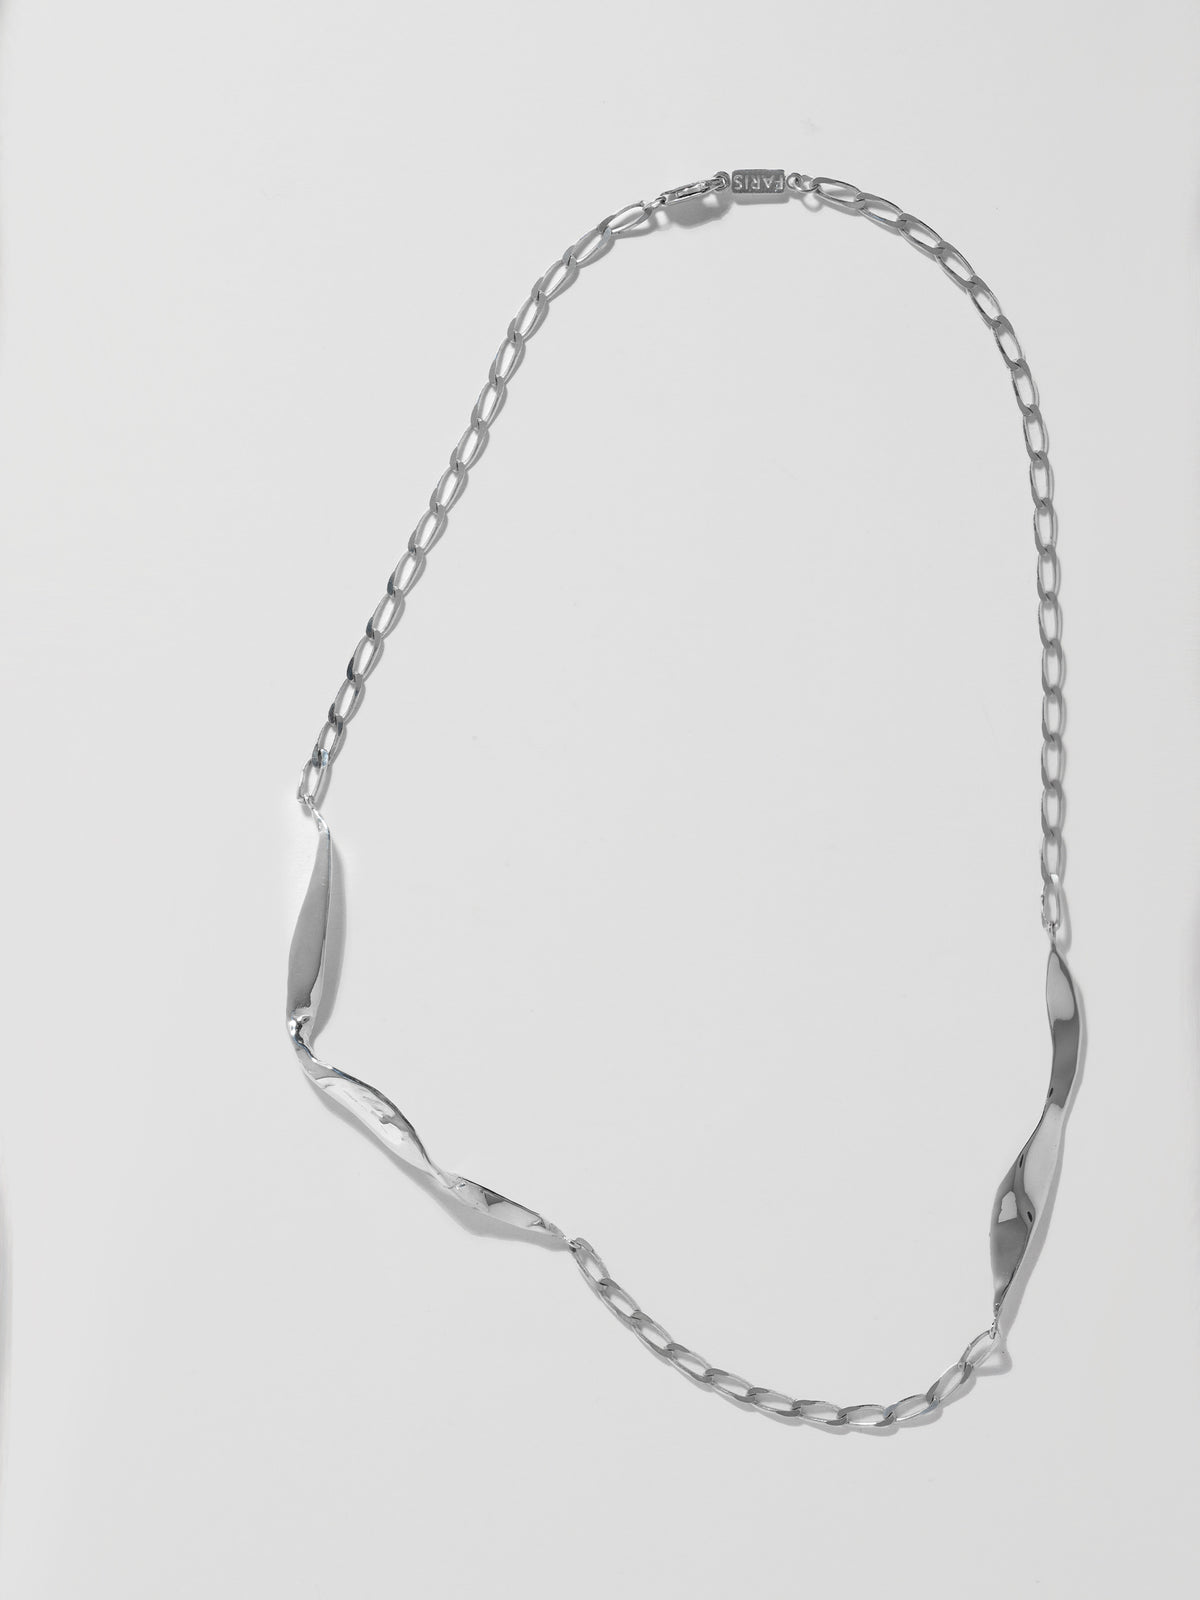 Product image of FARIS BLADE Necklace in sterling silver, full piece in view